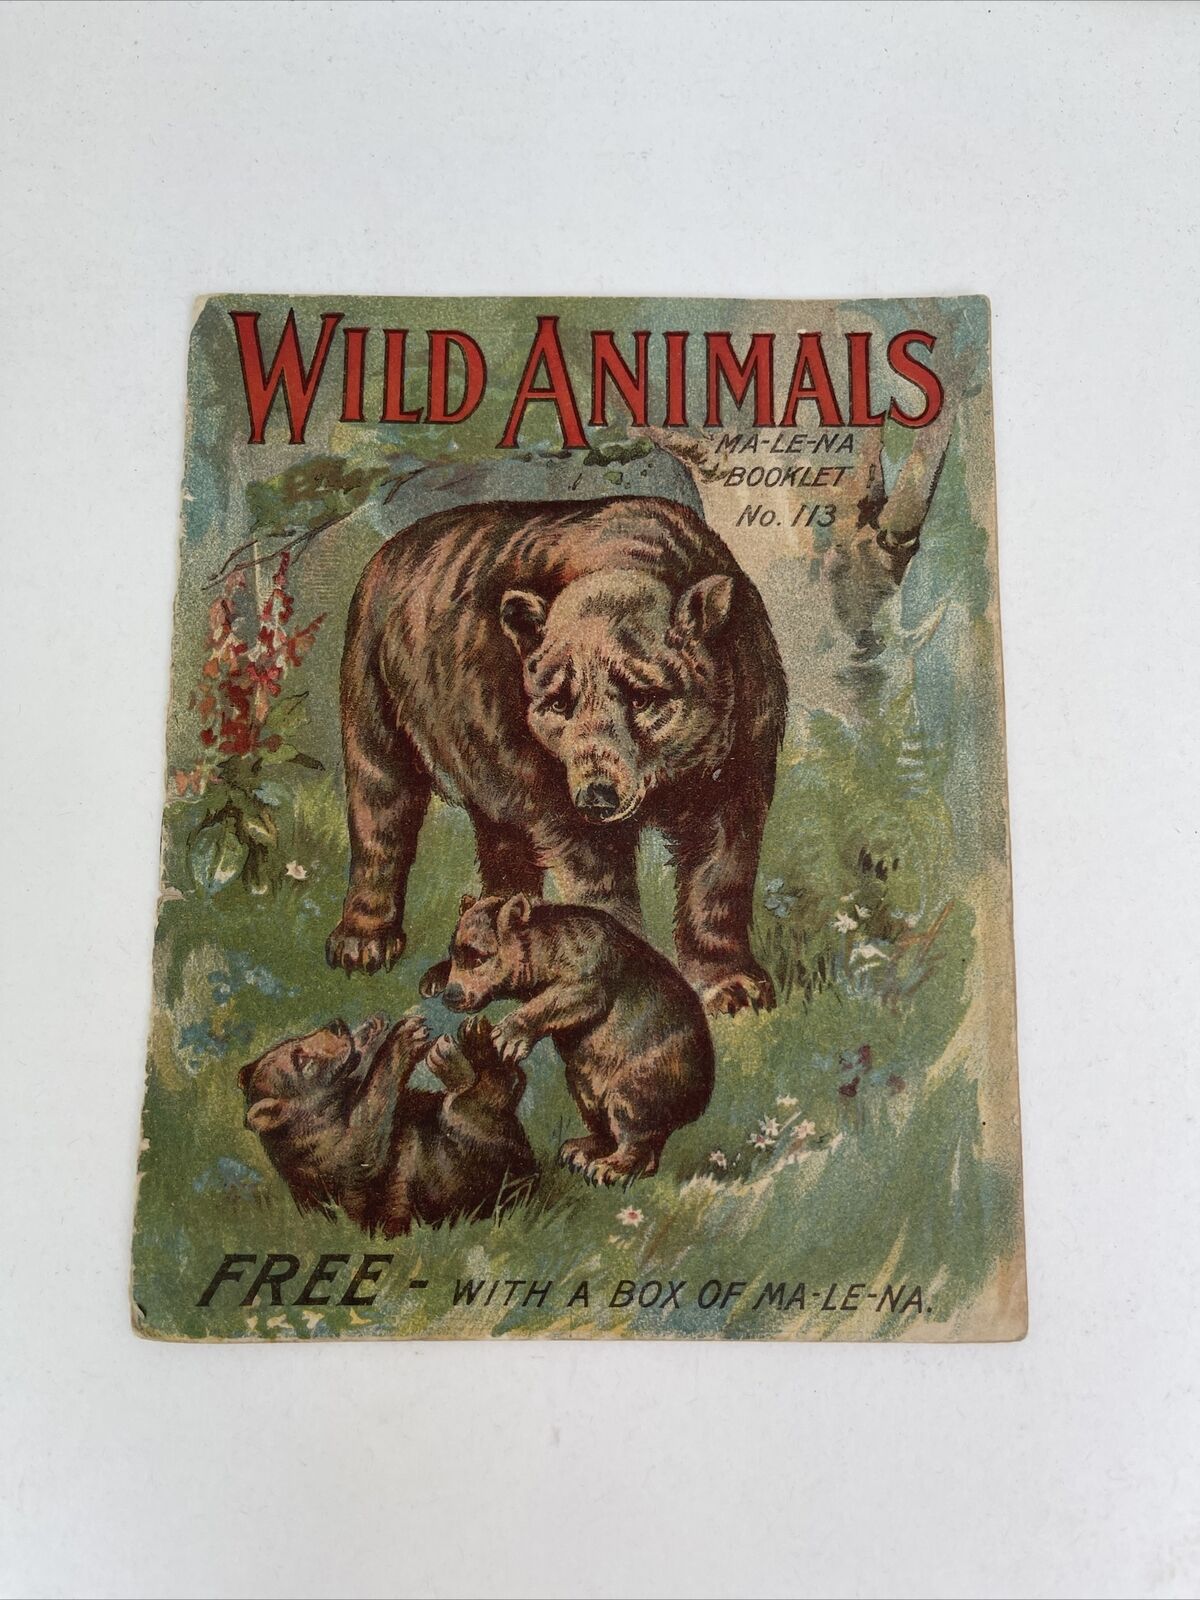 Wild Animals Ma-Le-Na Stomach Liver Pills Booklet No. 113 - Vintage Advertising